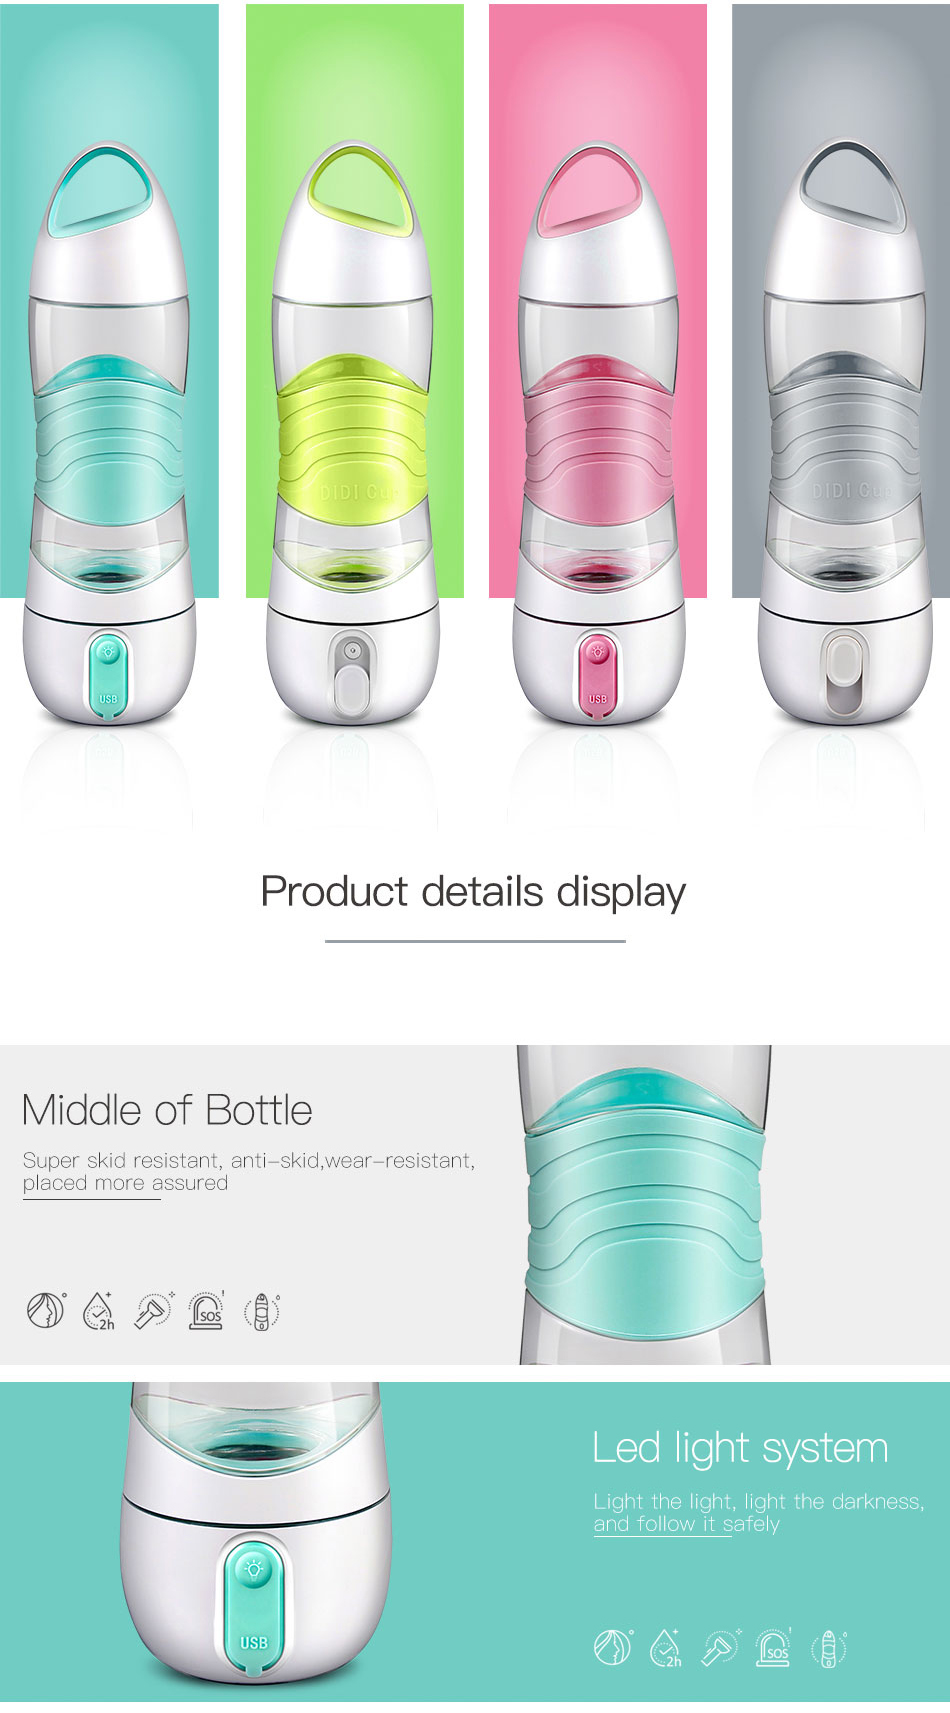 KCASA-DDH8 Portable USB Air Humidifier Spray 400ML Water Bottles Creative Outdoor Drinking Cup Sports Spray Bottle with Light 21